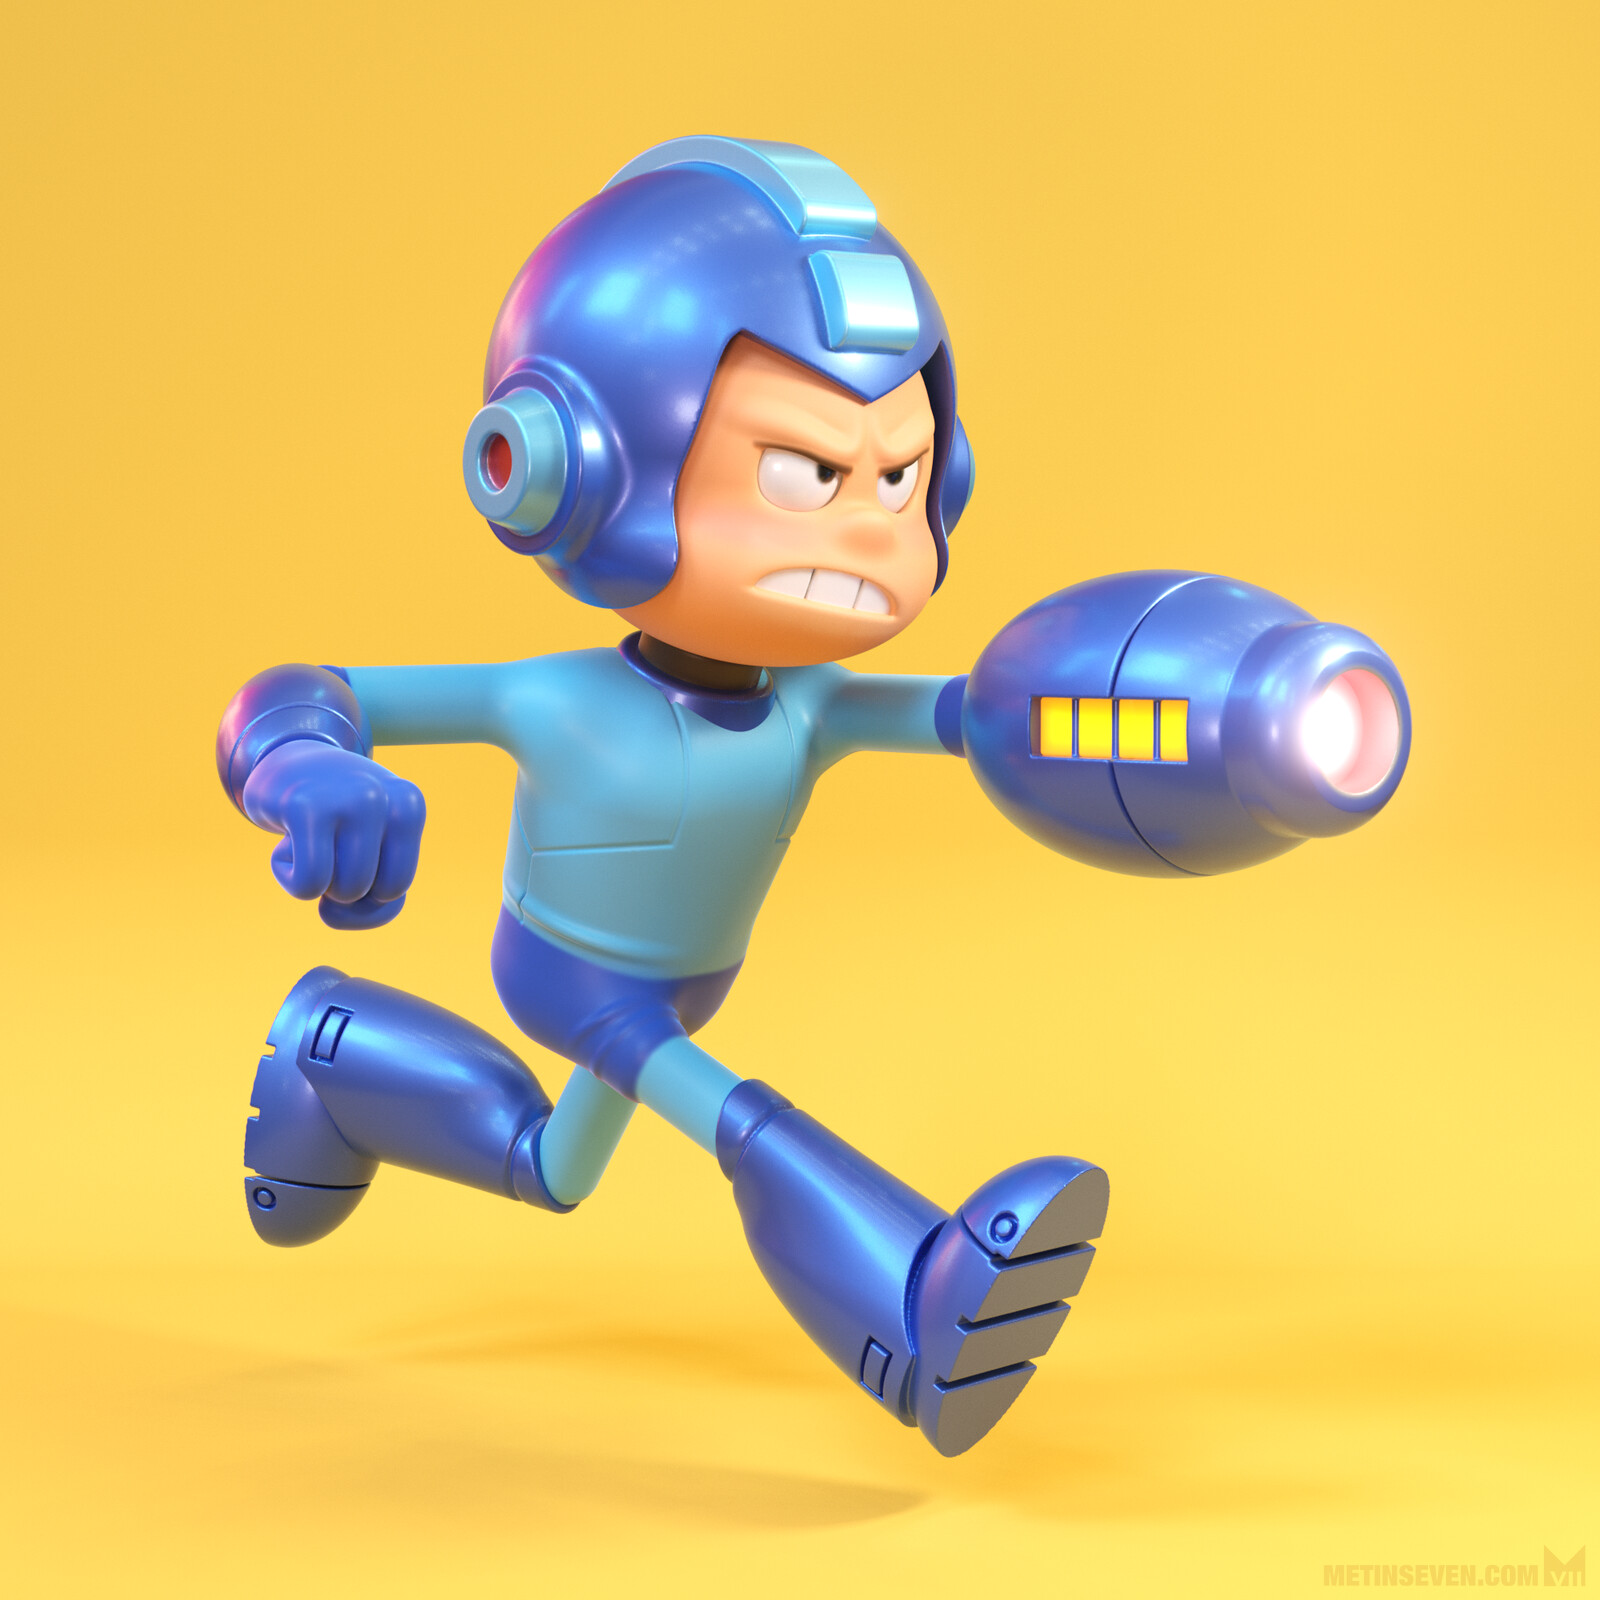 Megaman to the rescue! A tribute to the classic game character, inspired by an Alan Stewart drawing.